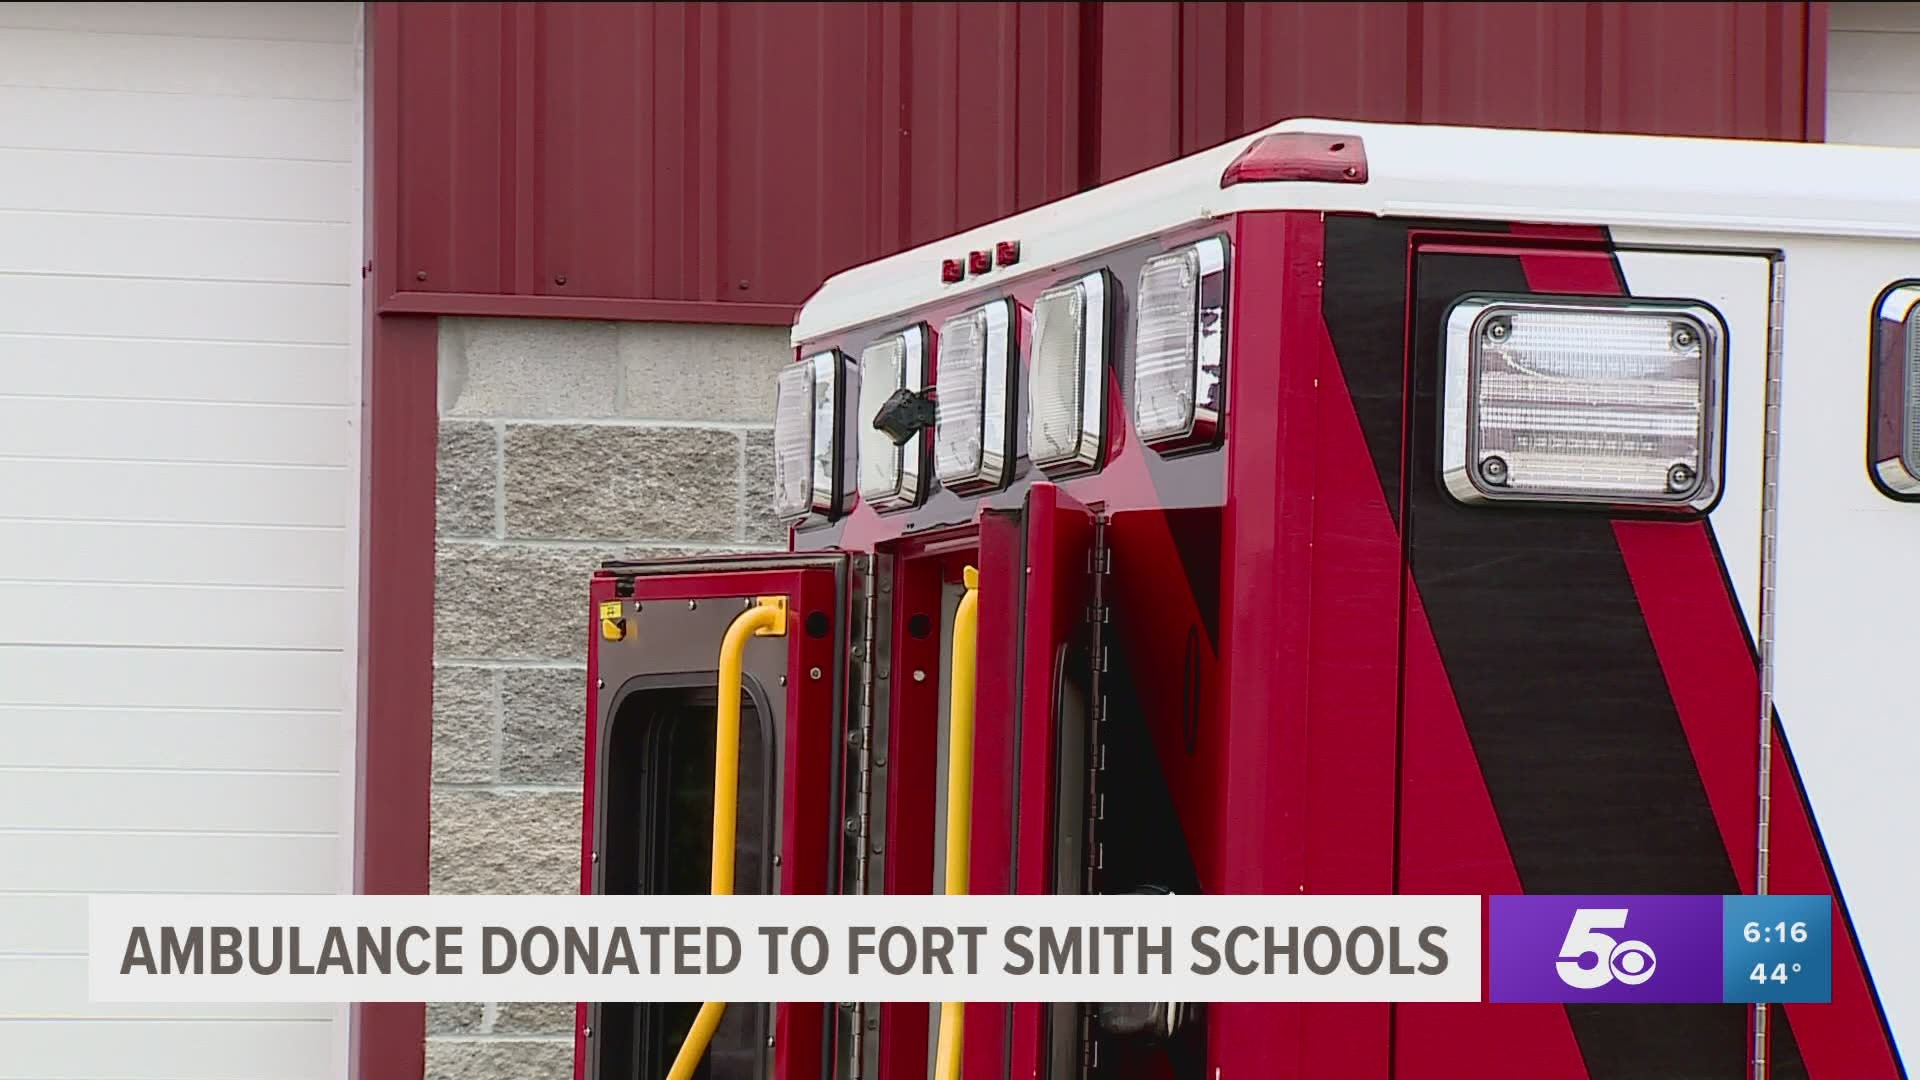 An ambulance has been donated to Fort Smith Schools.